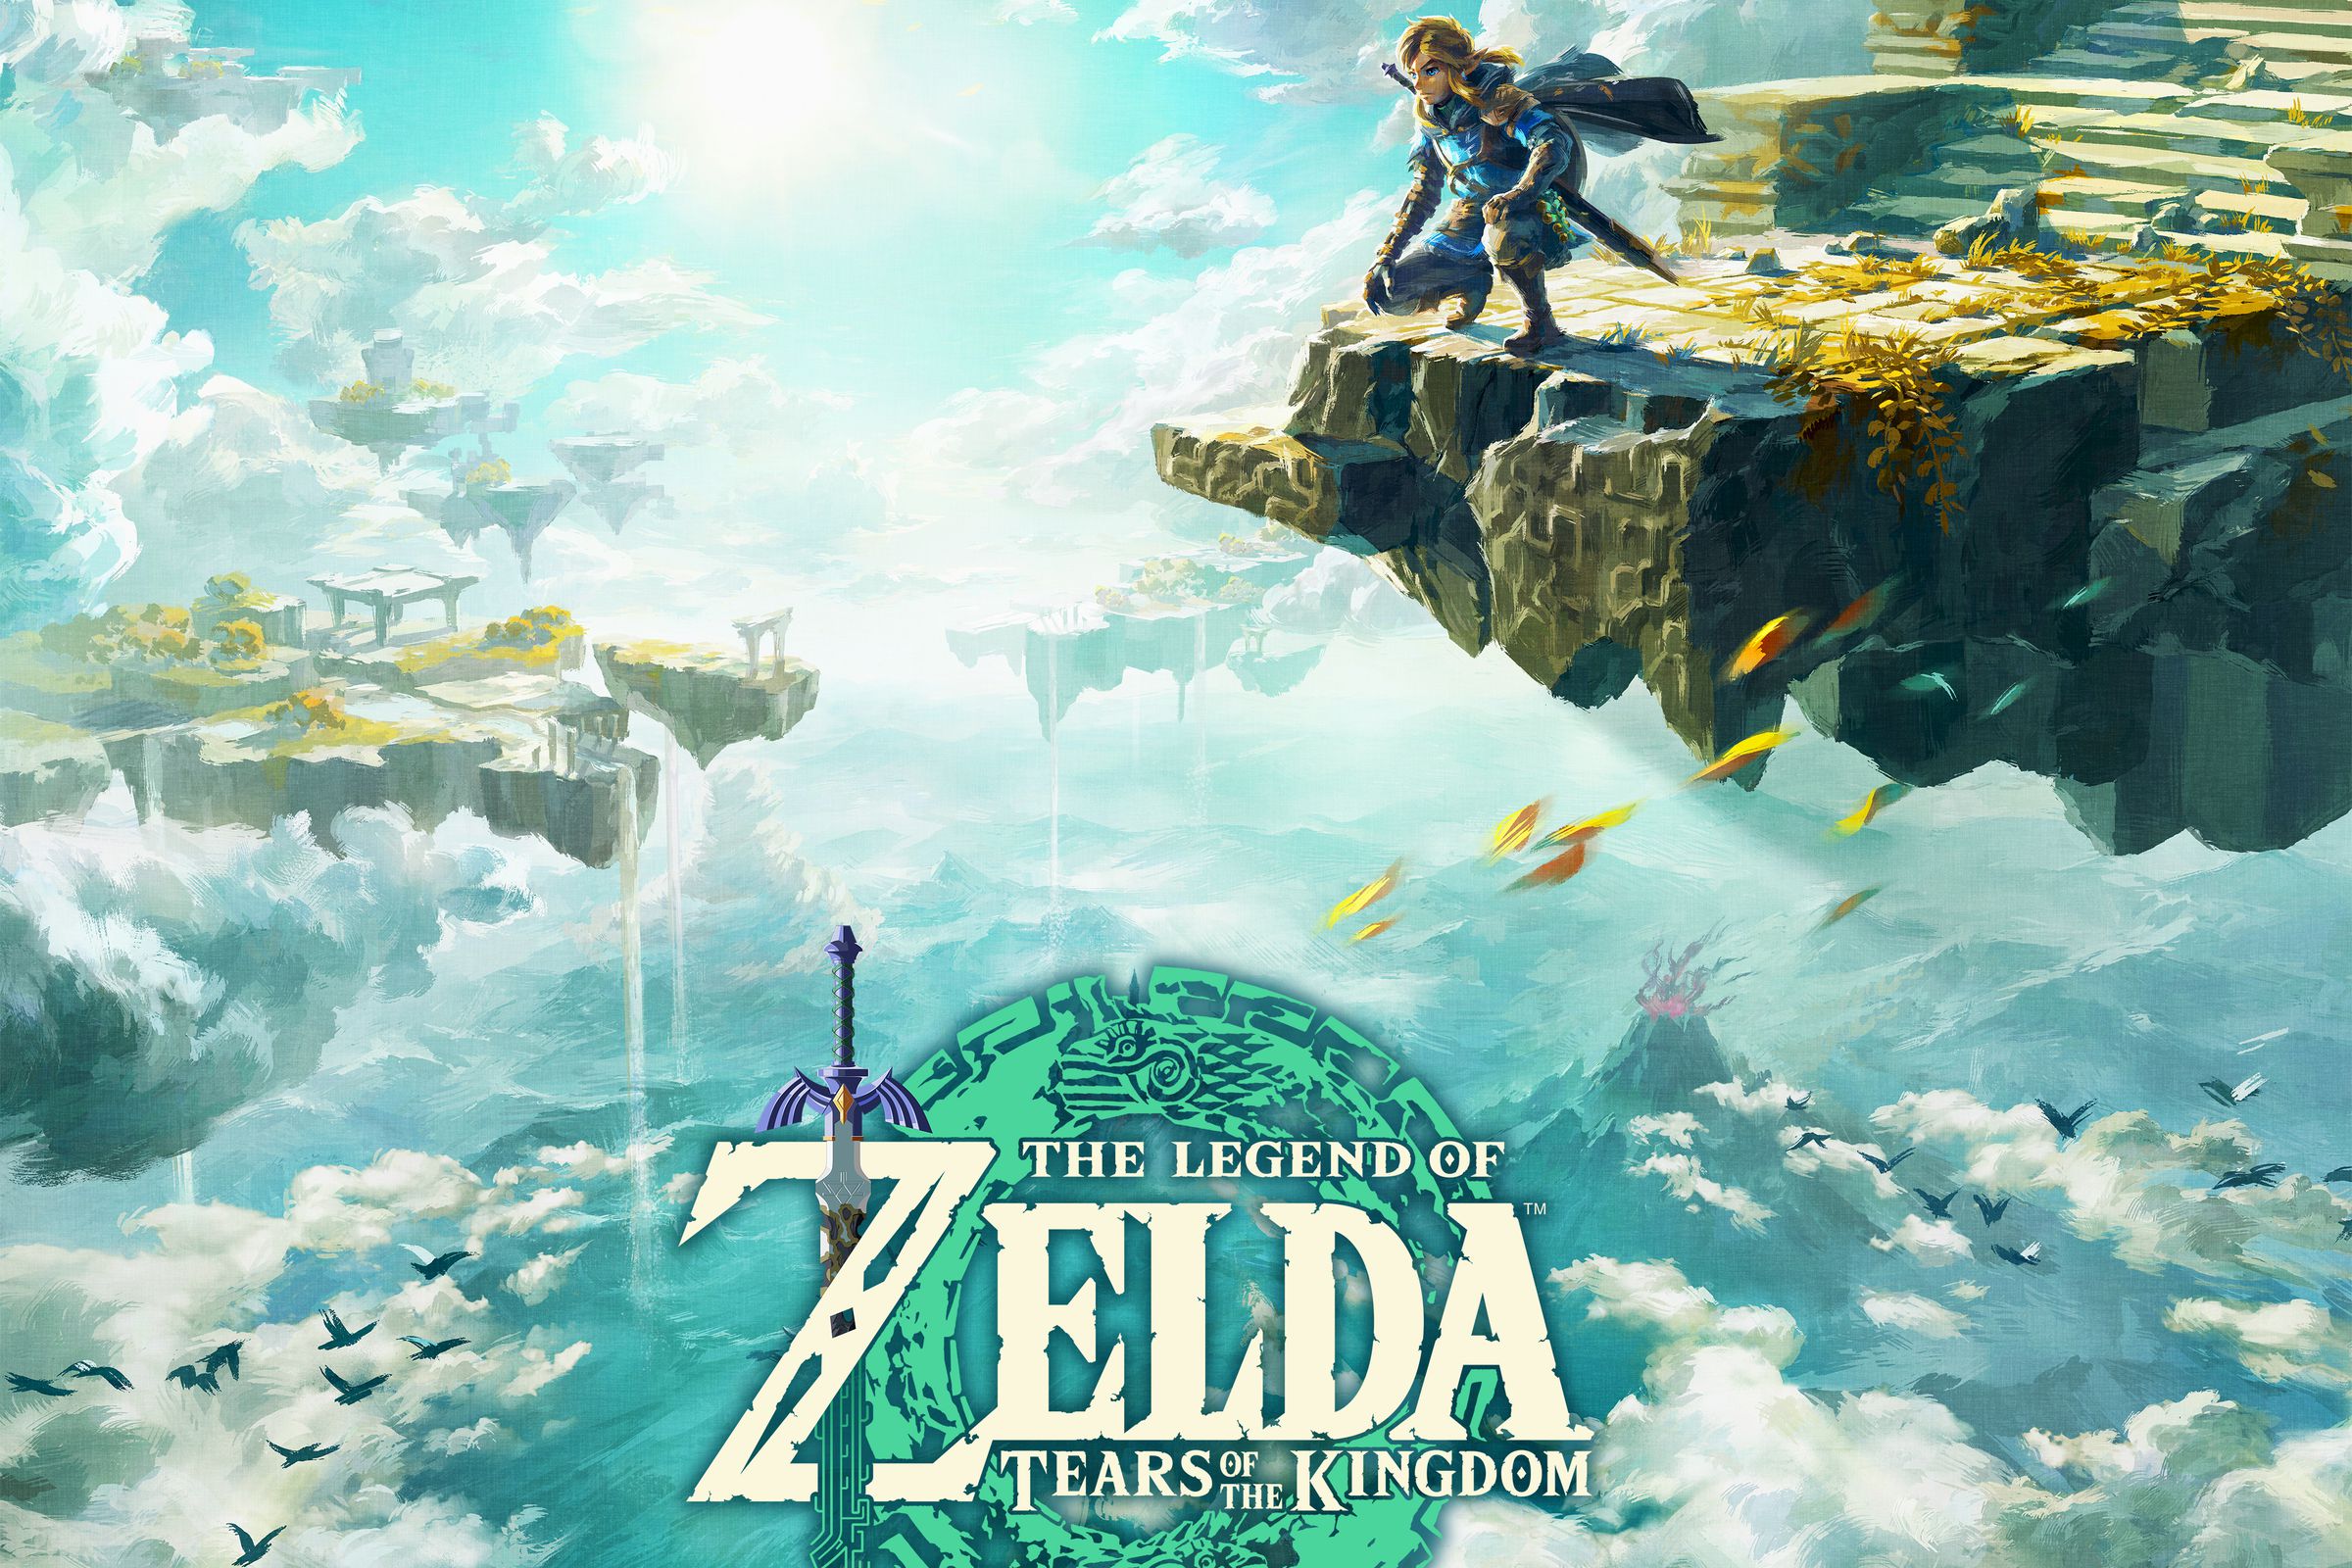 Link, wearing a blue cloak, kneels down at the edge of an island, hovering above the clouds. Other sky islands float in the background.